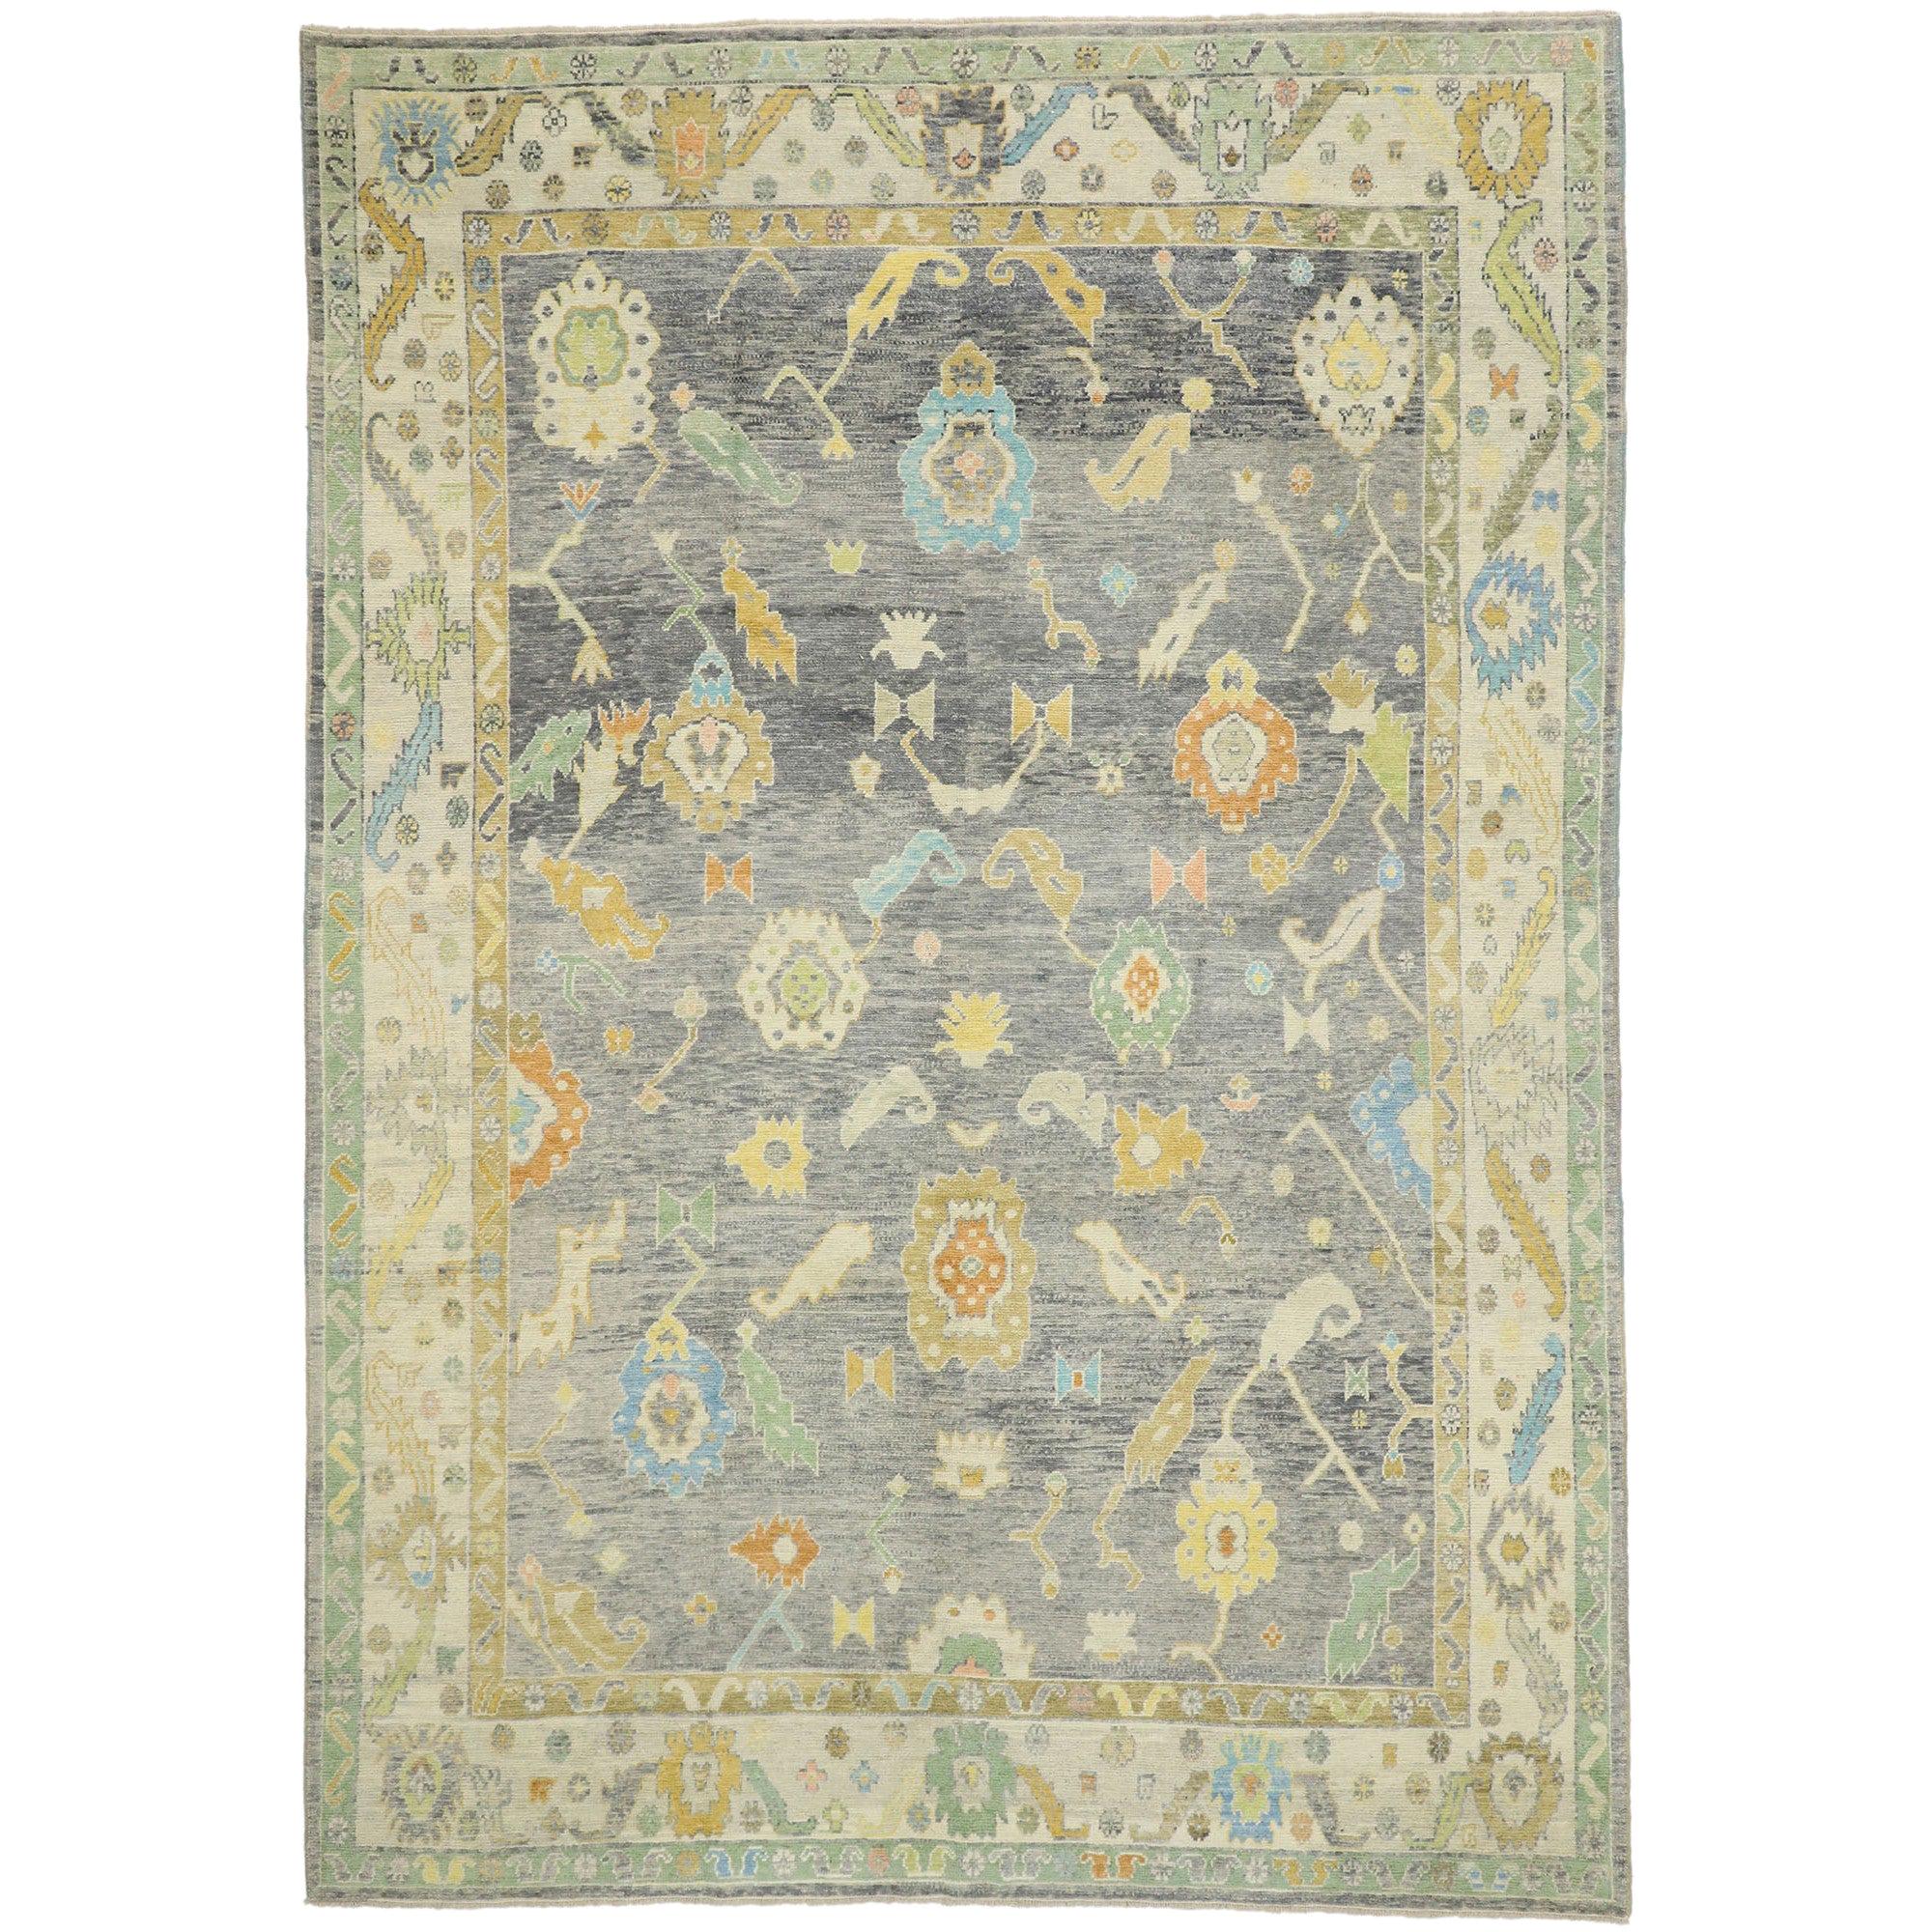 Contemporary Turkish Oushak Rug with Pastel Colors and French Transitional Style